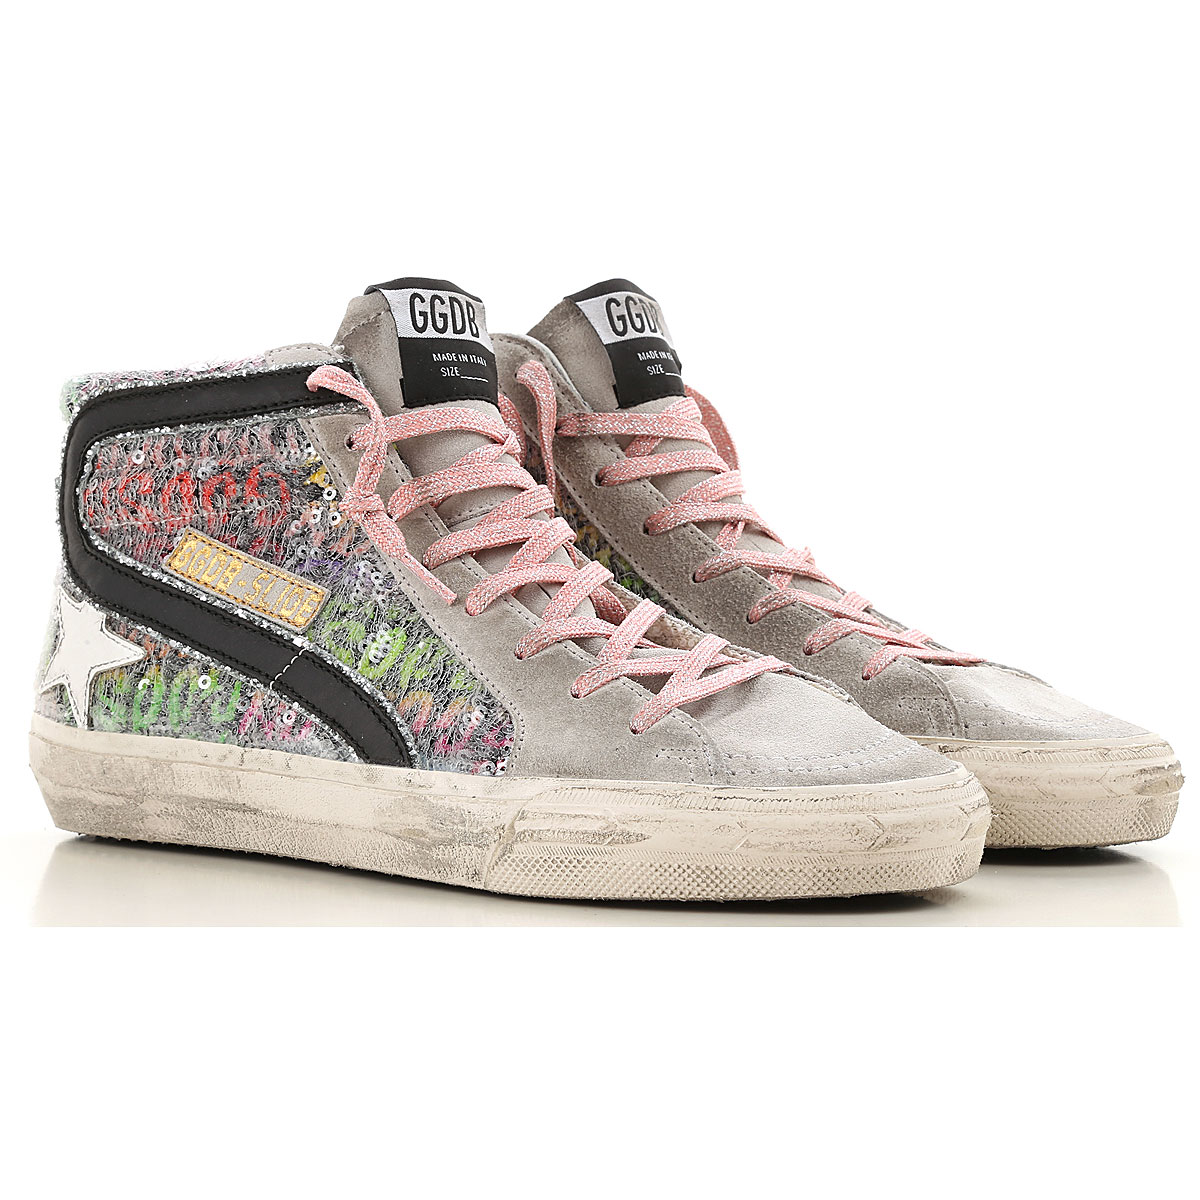 Womens Shoes Golden Goose, Style code: g34ws595-a14-